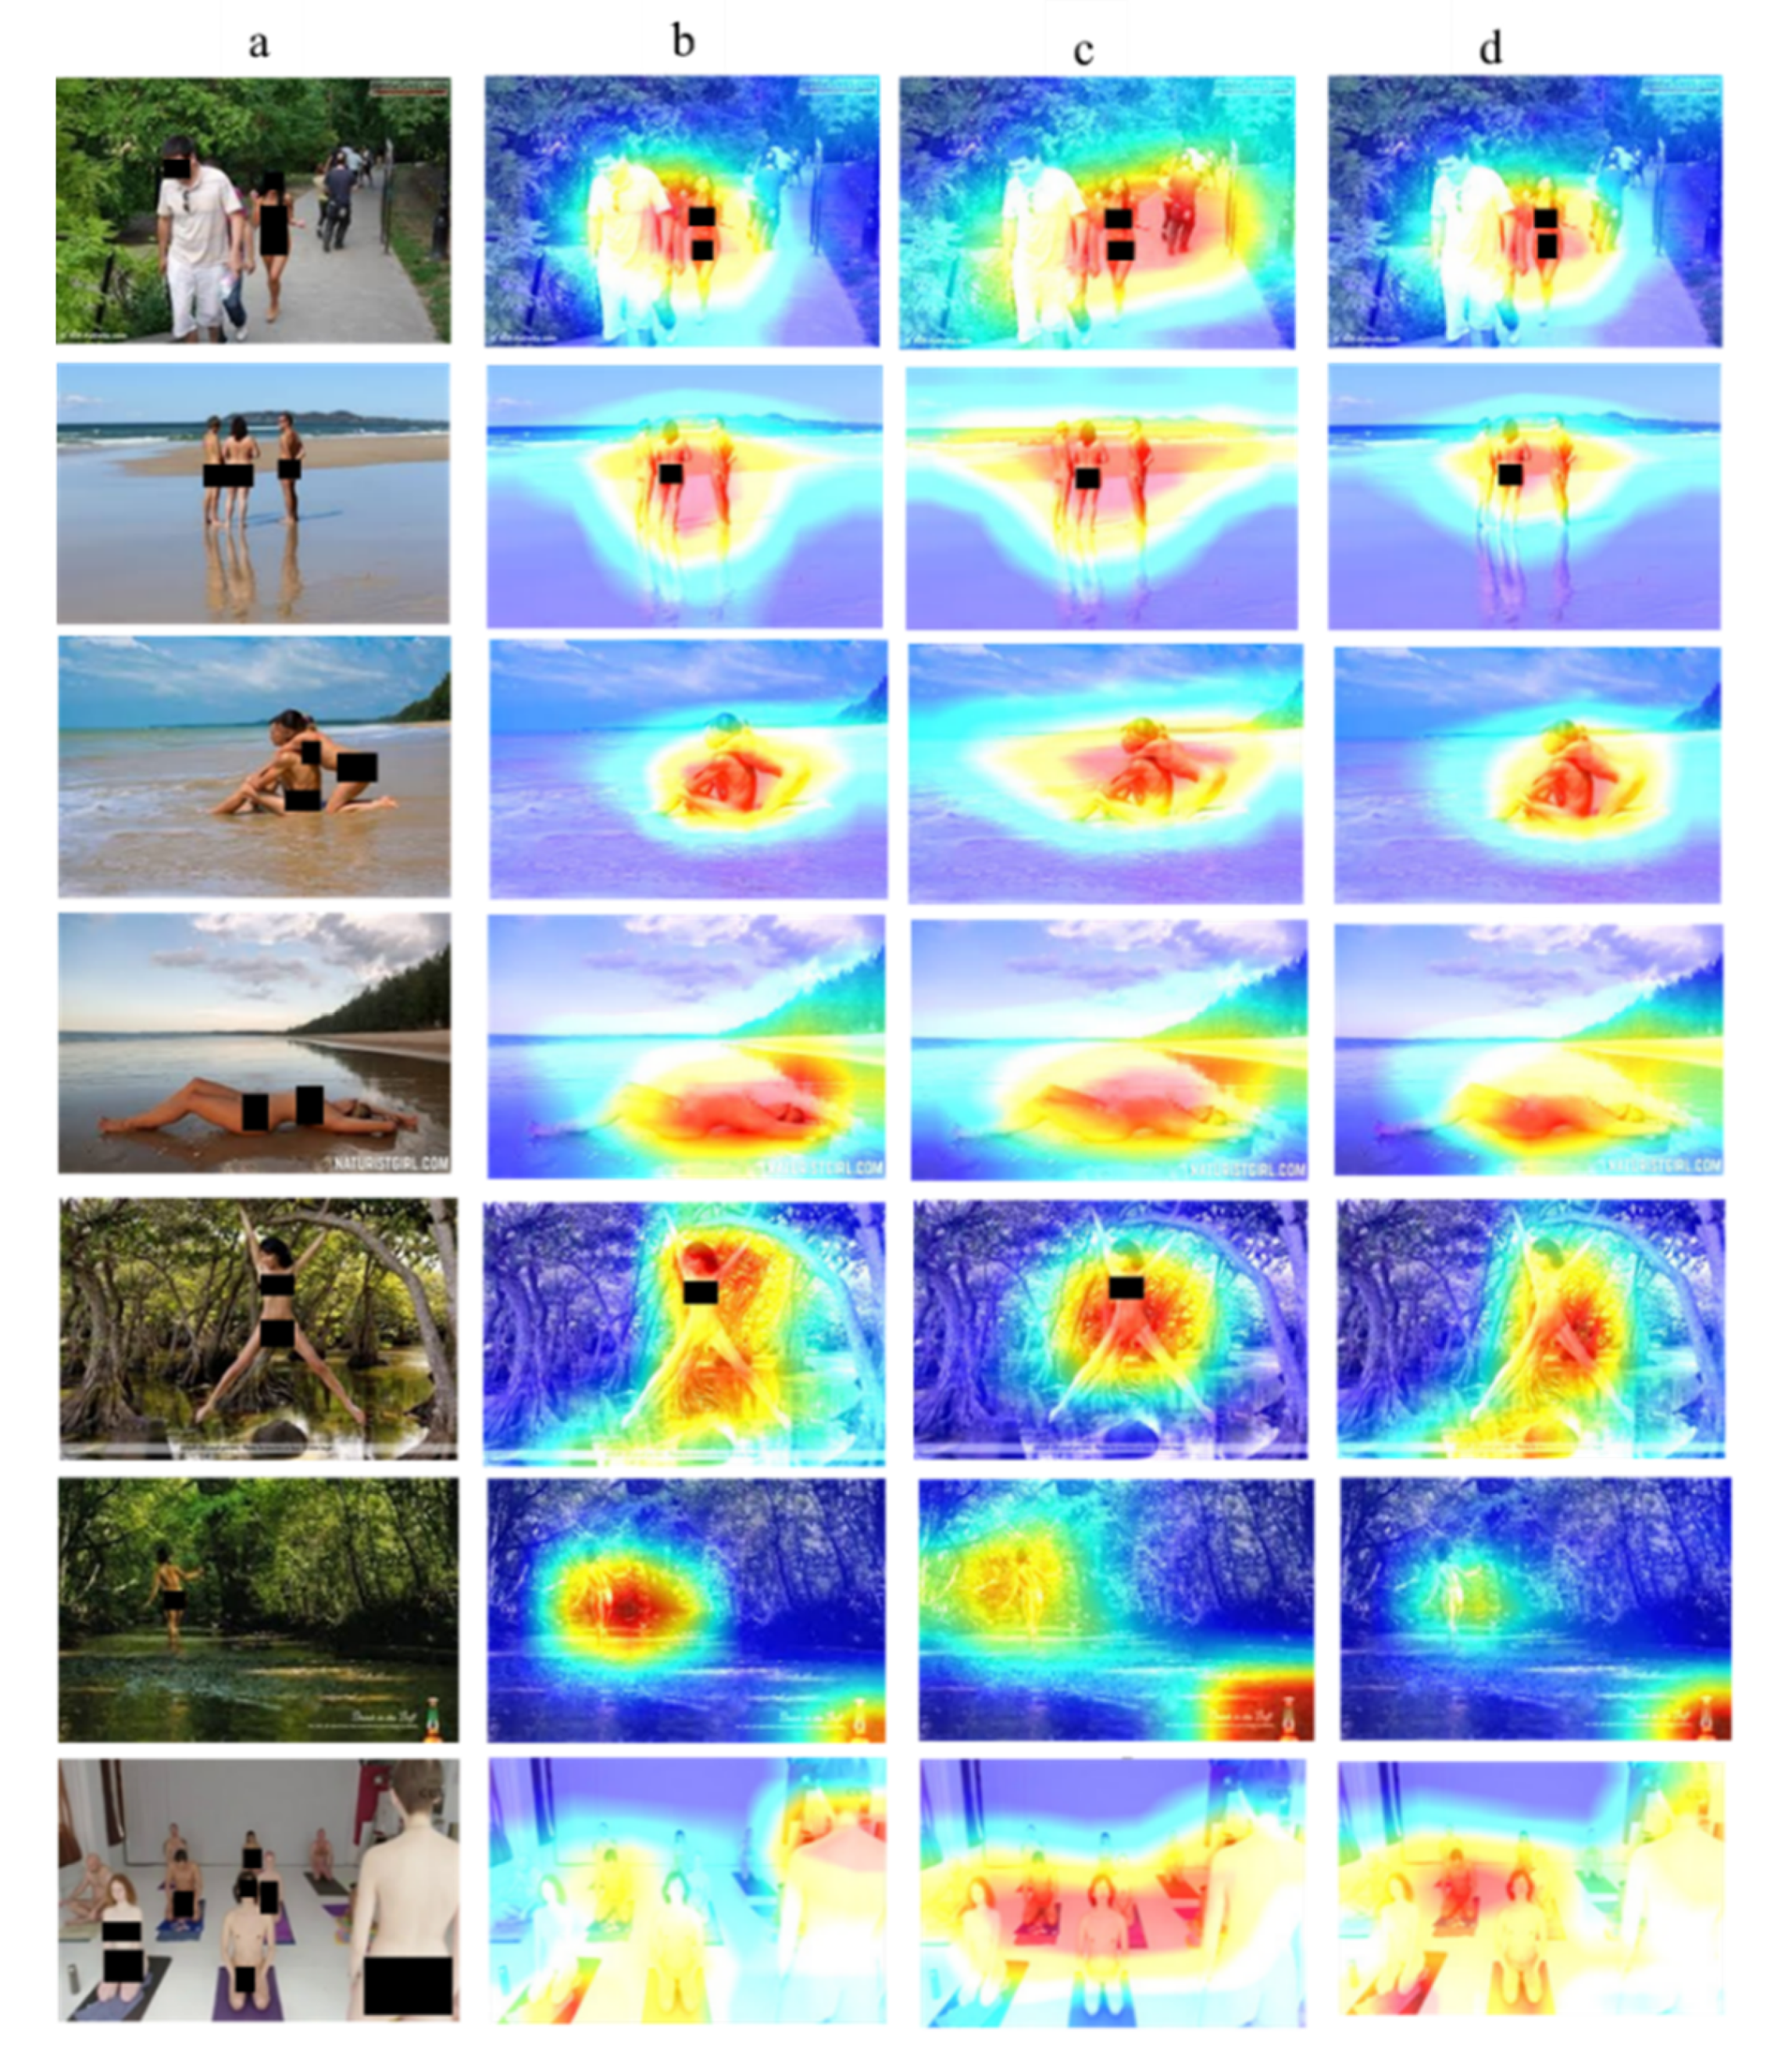 Symmetry | Free Full-Text | Transfer Detection of YOLO to Focus CNN's  Attention on Nude Regions for Adult Content Detection | HTML